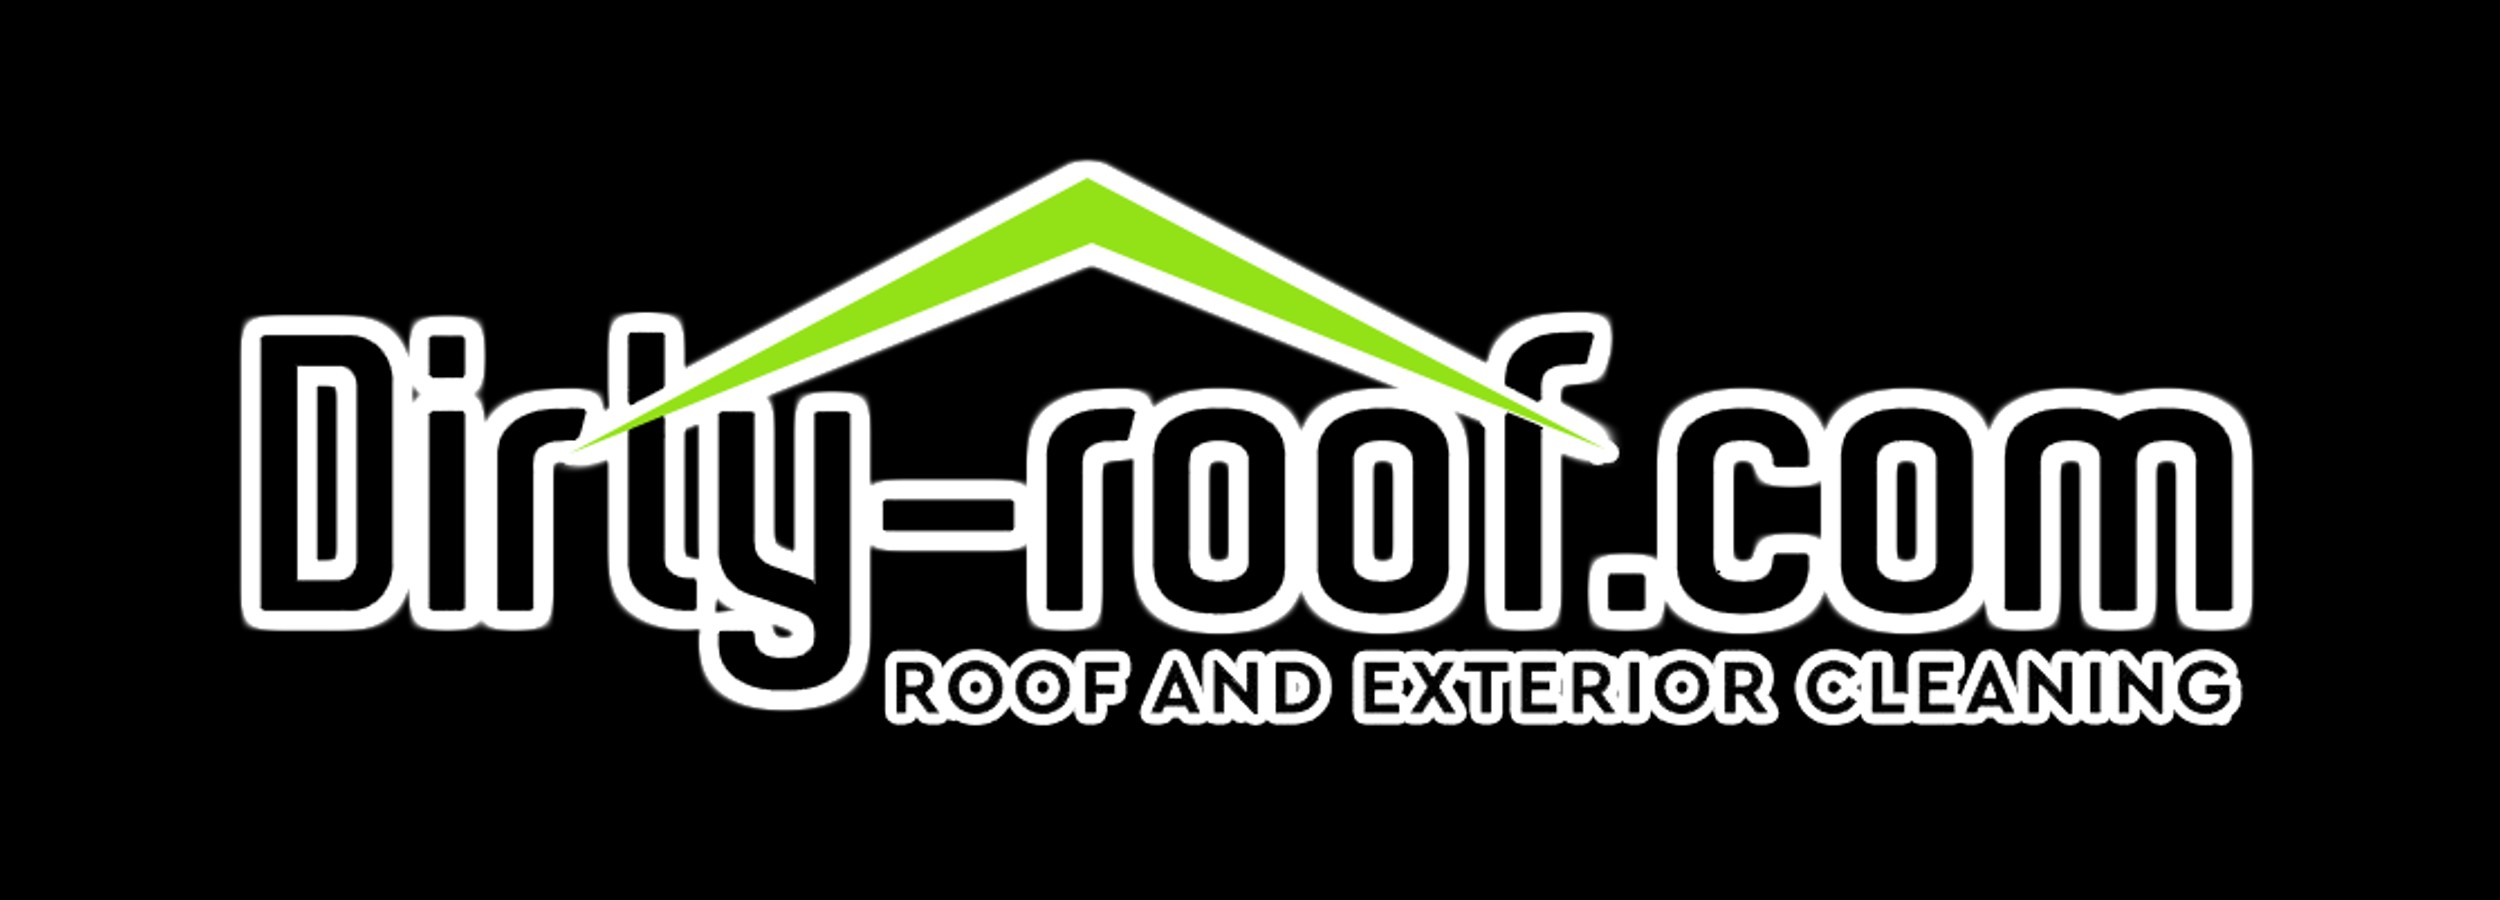 Dirty-Roof.com Roof Cleaning & Pressure Washing Service